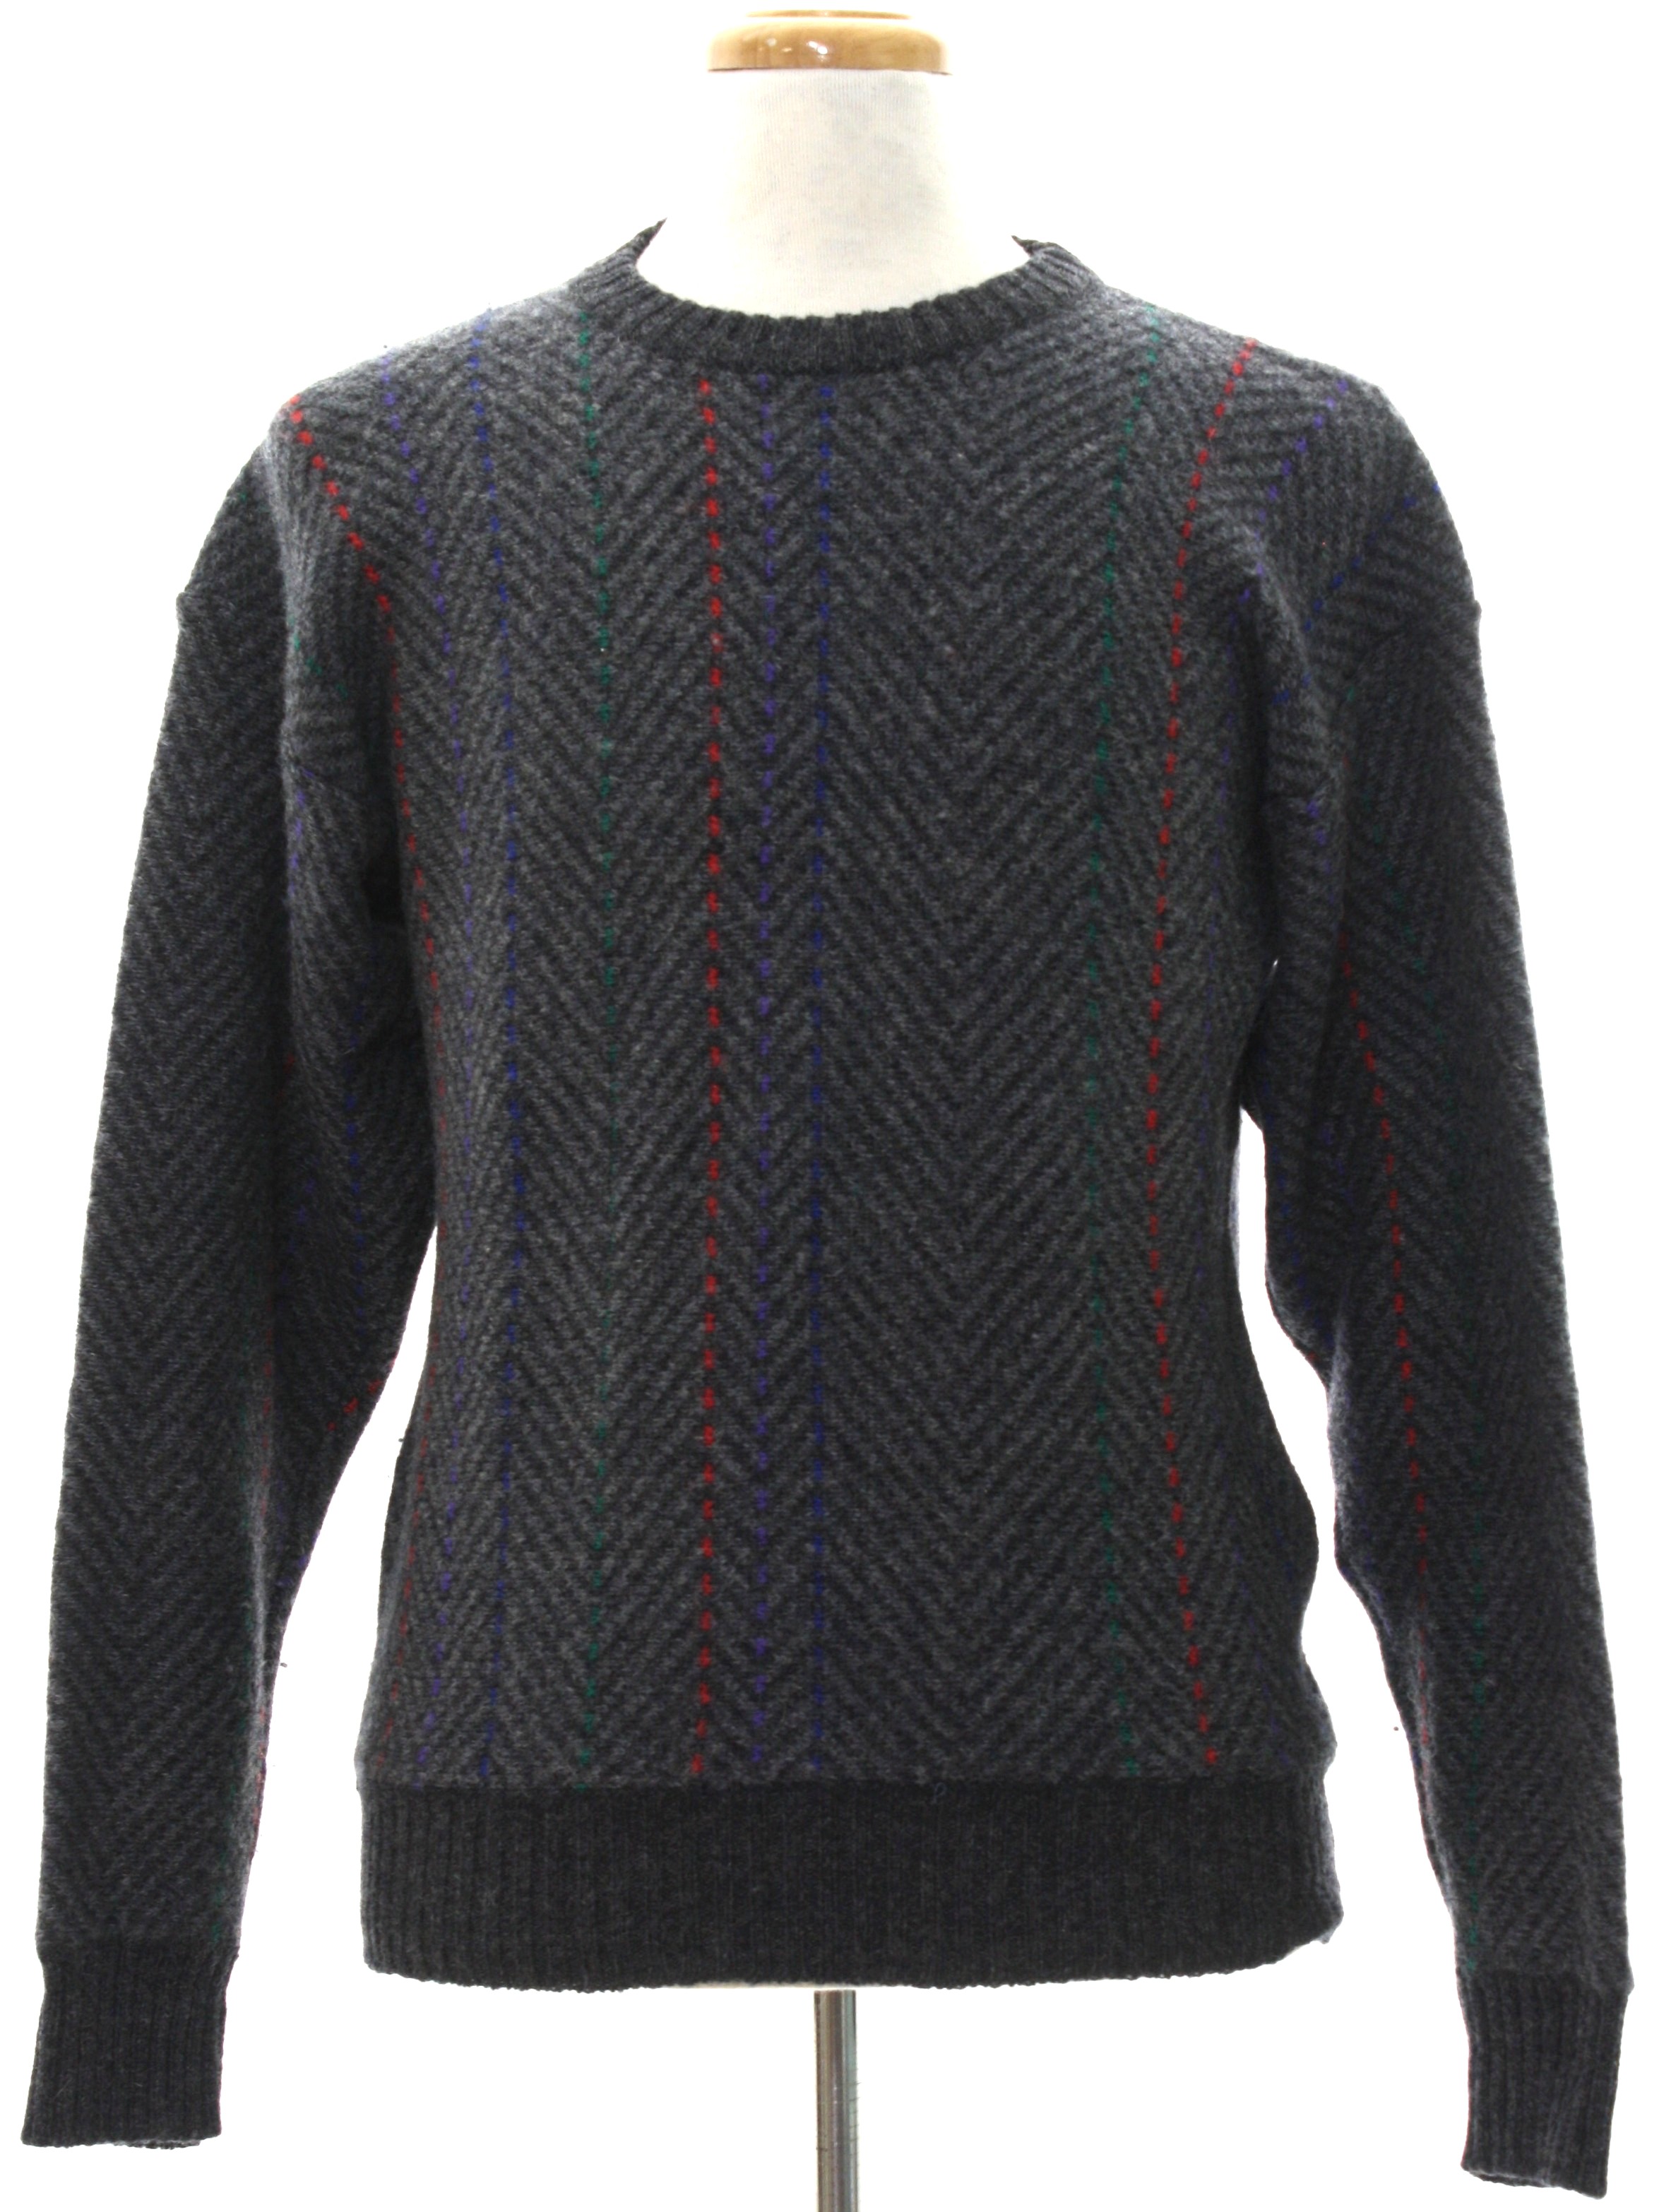 1980's Retro Sweater: 80s -Preswick And Moore- Mens heathered grey and ...